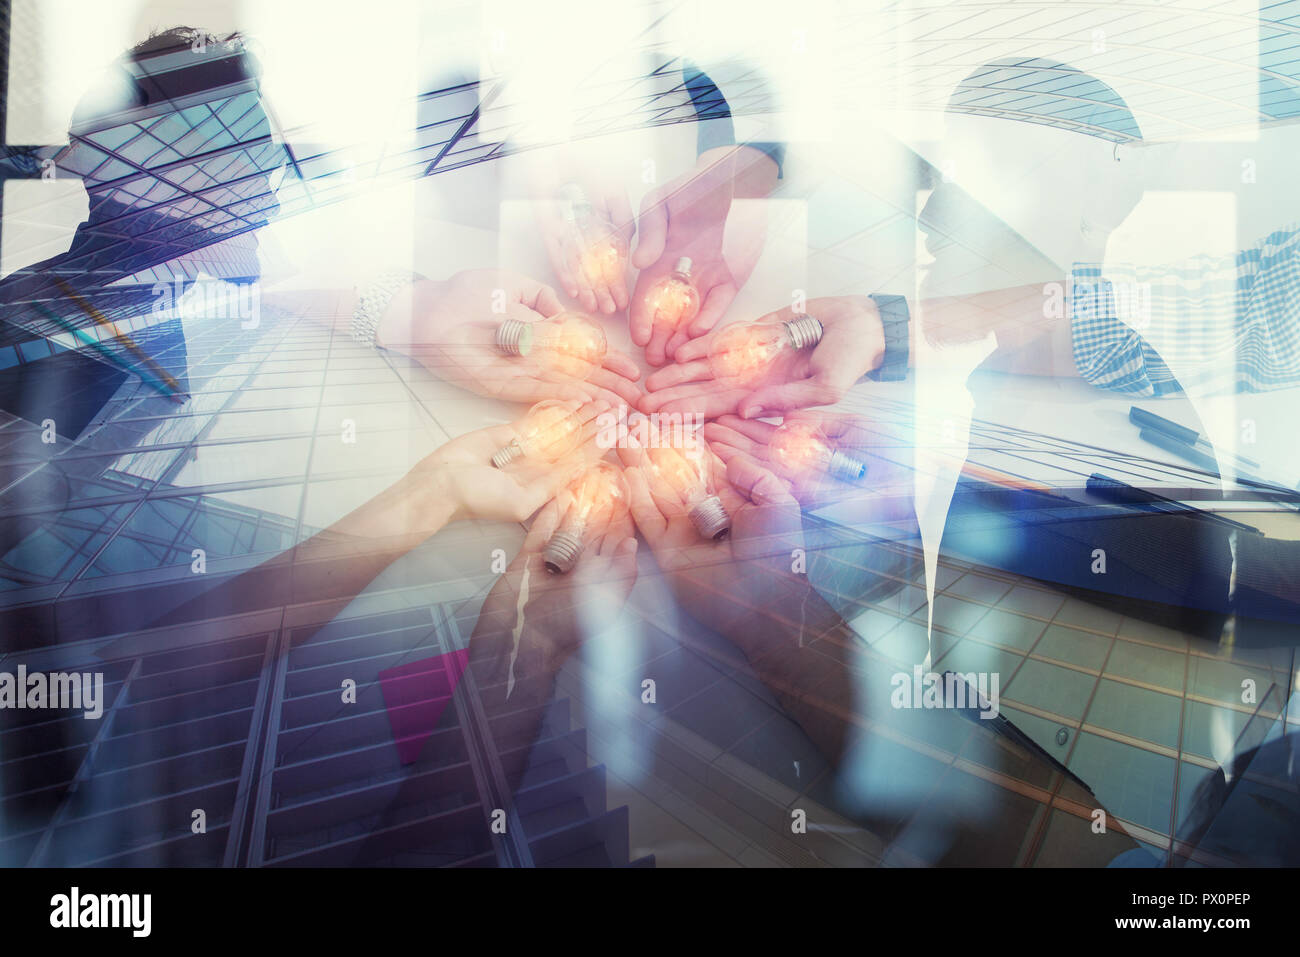 Teamwork and brainstorming concept with businessmen that share an idea with a lamp. Concept company startup. Double exposure Stock Photo